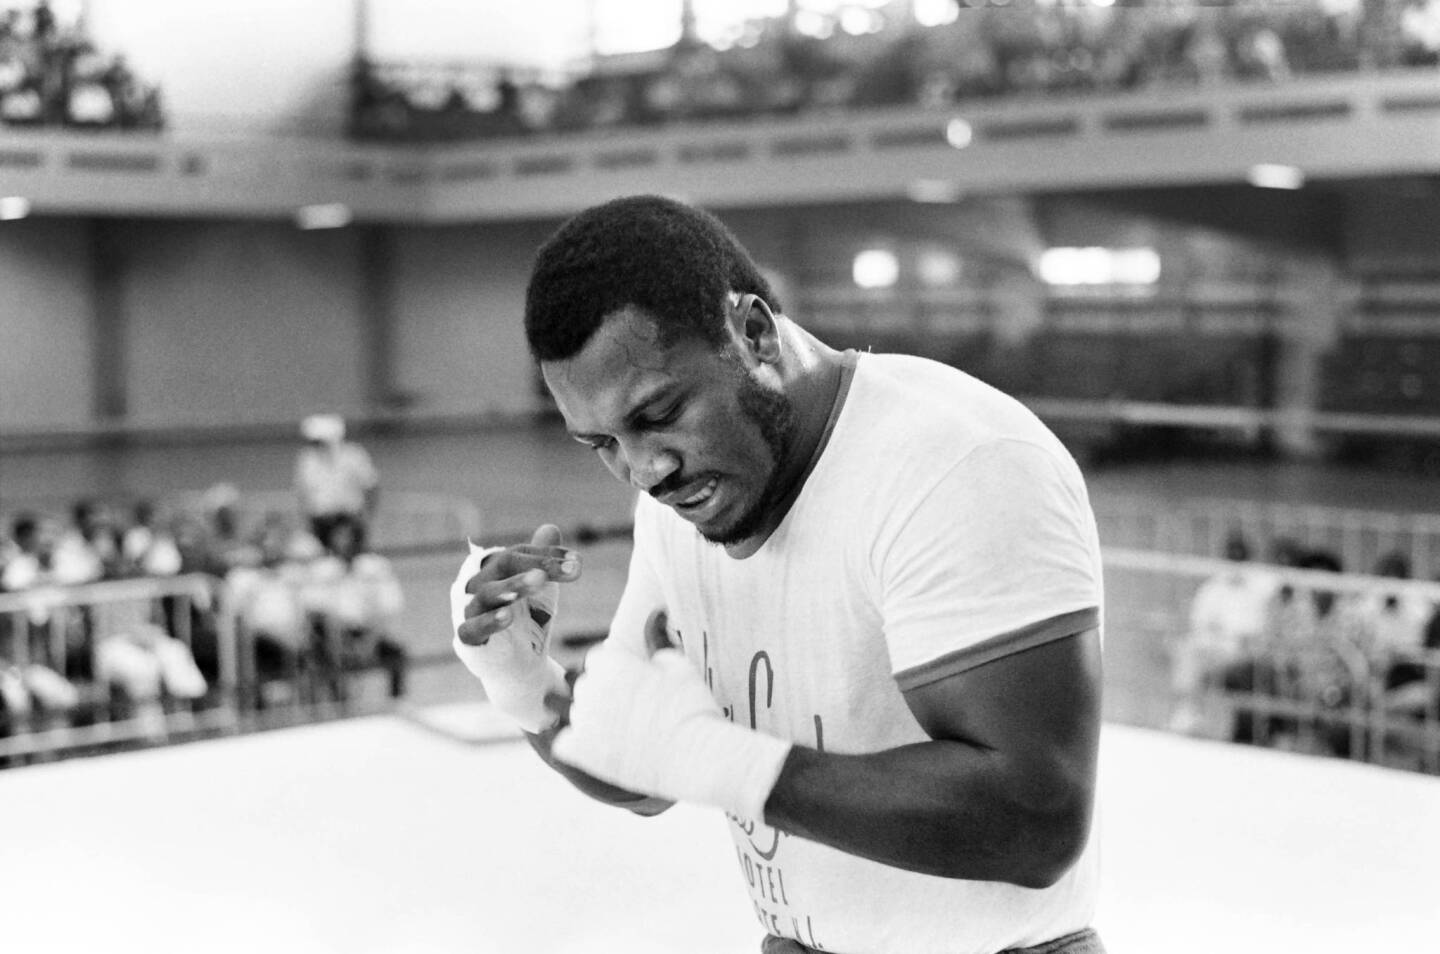 He had all the qualities that critics of modern-day boxing say are missing. His series of fights against Muhammad Ali should never be forgotten -- and should be savored by those who loved boxing's glory days.